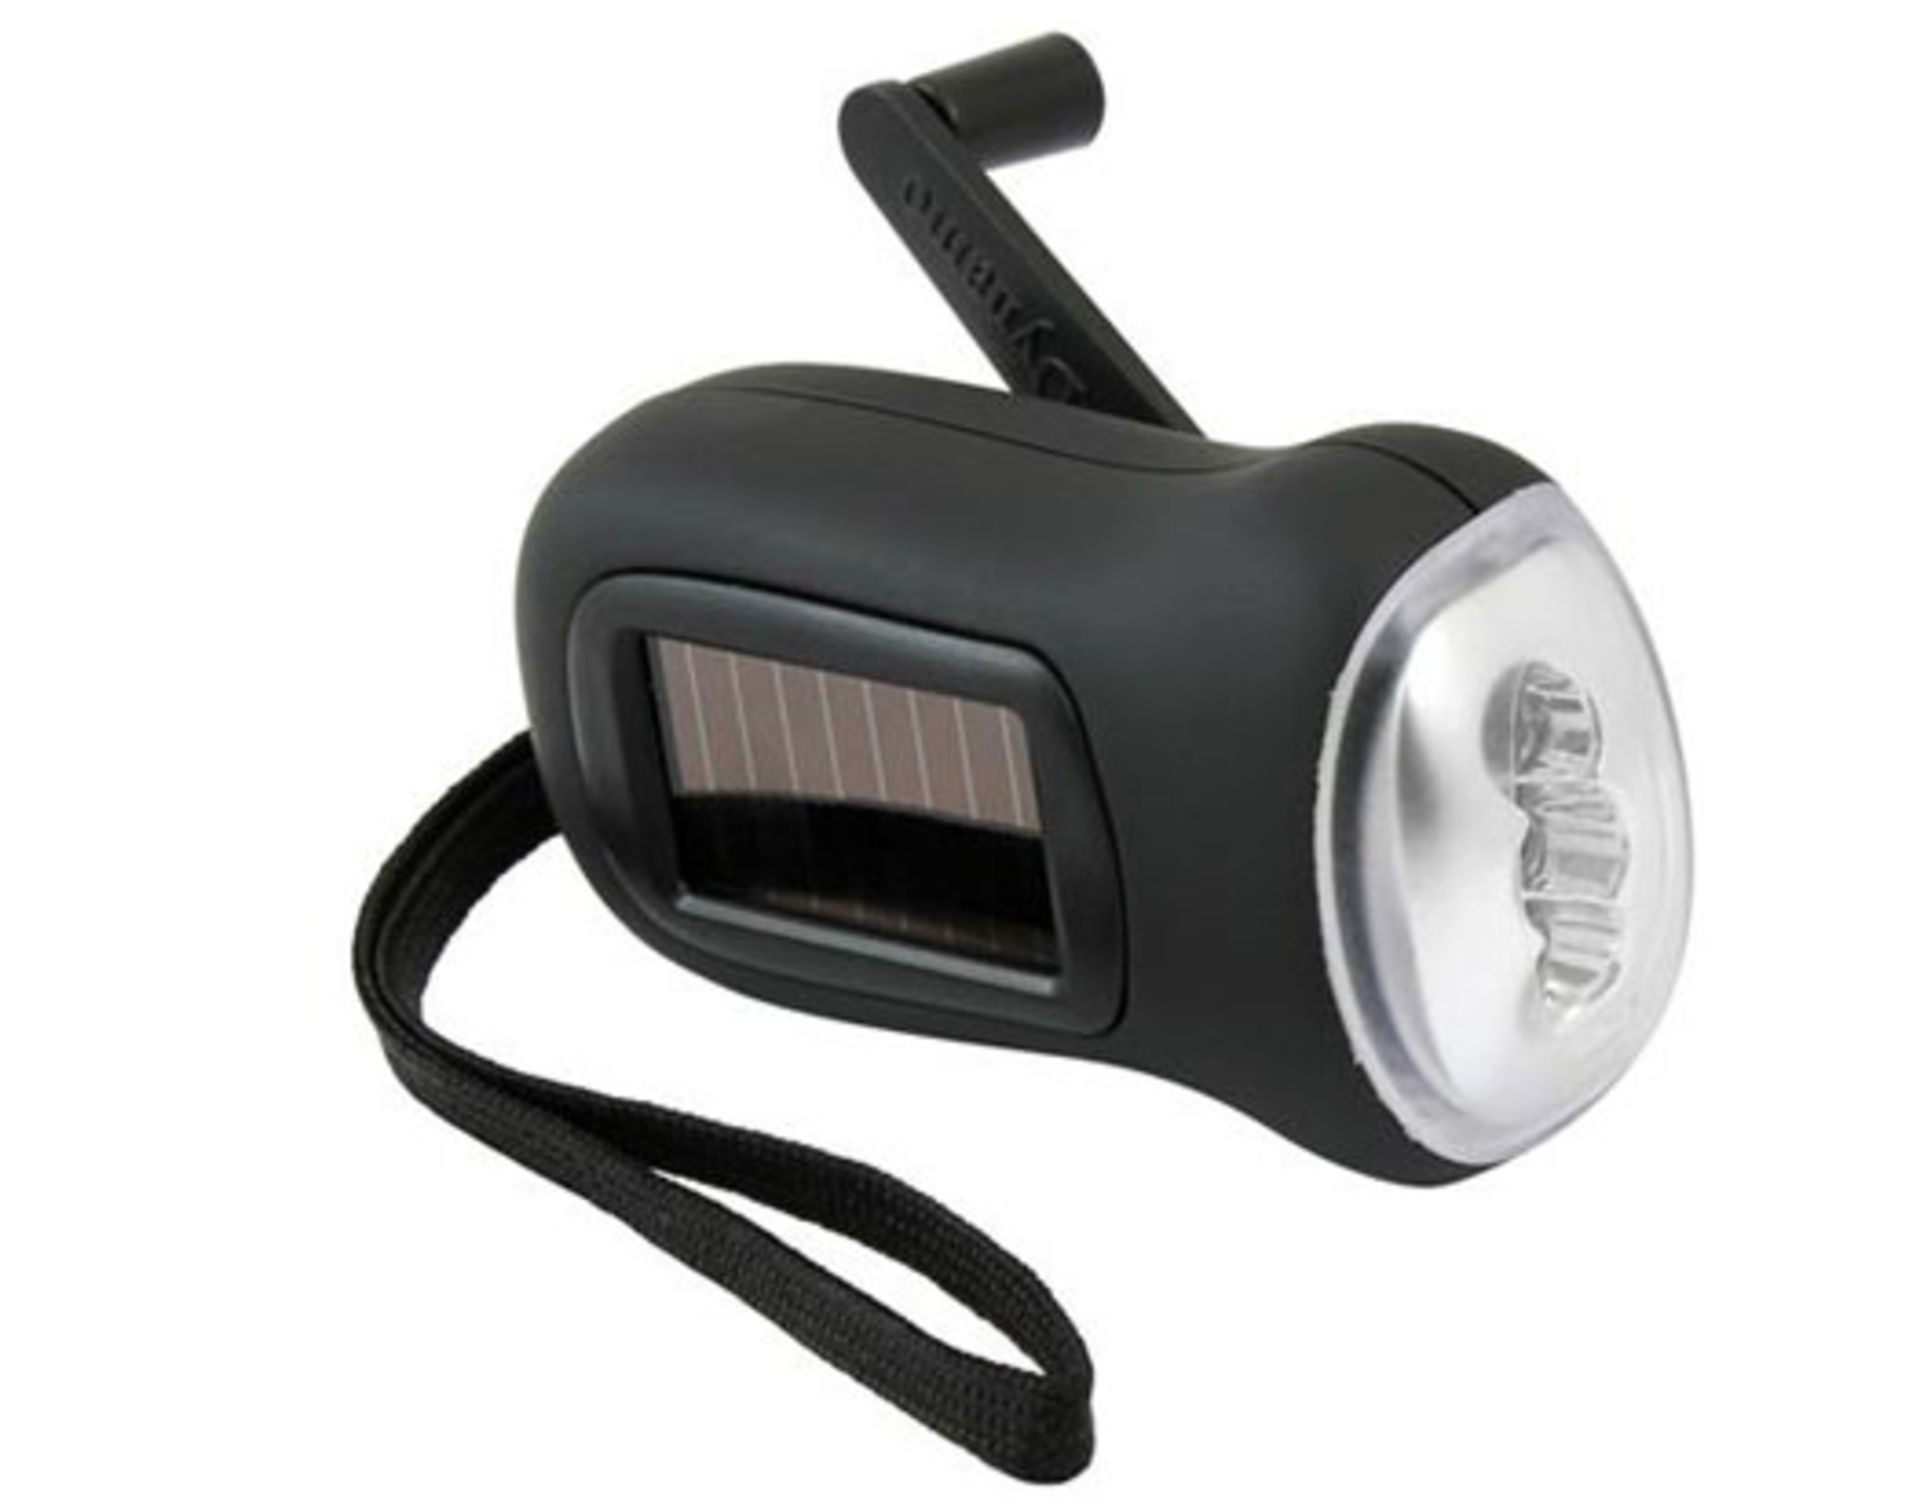 V *TRADE QTY* Brand New 3 LED Wind Up Solar Torch X 24 YOUR BID PRICE TO BE MULTIPLIED BY TWENTY-